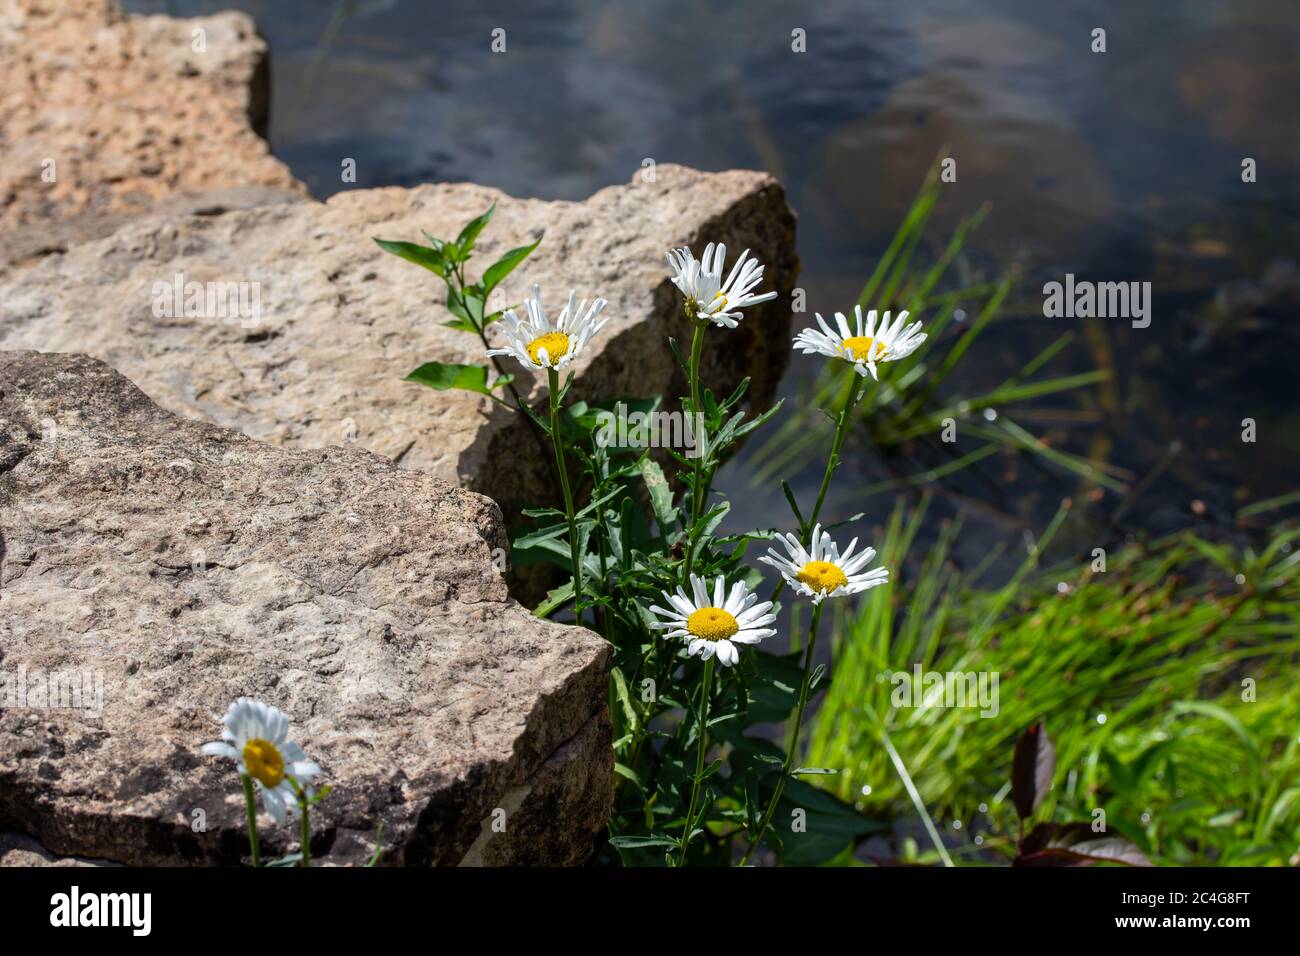 Close up landscape view of bright shasta daisies in front of a scenic rocky garden water pond reflecting blue sky Stock Photo